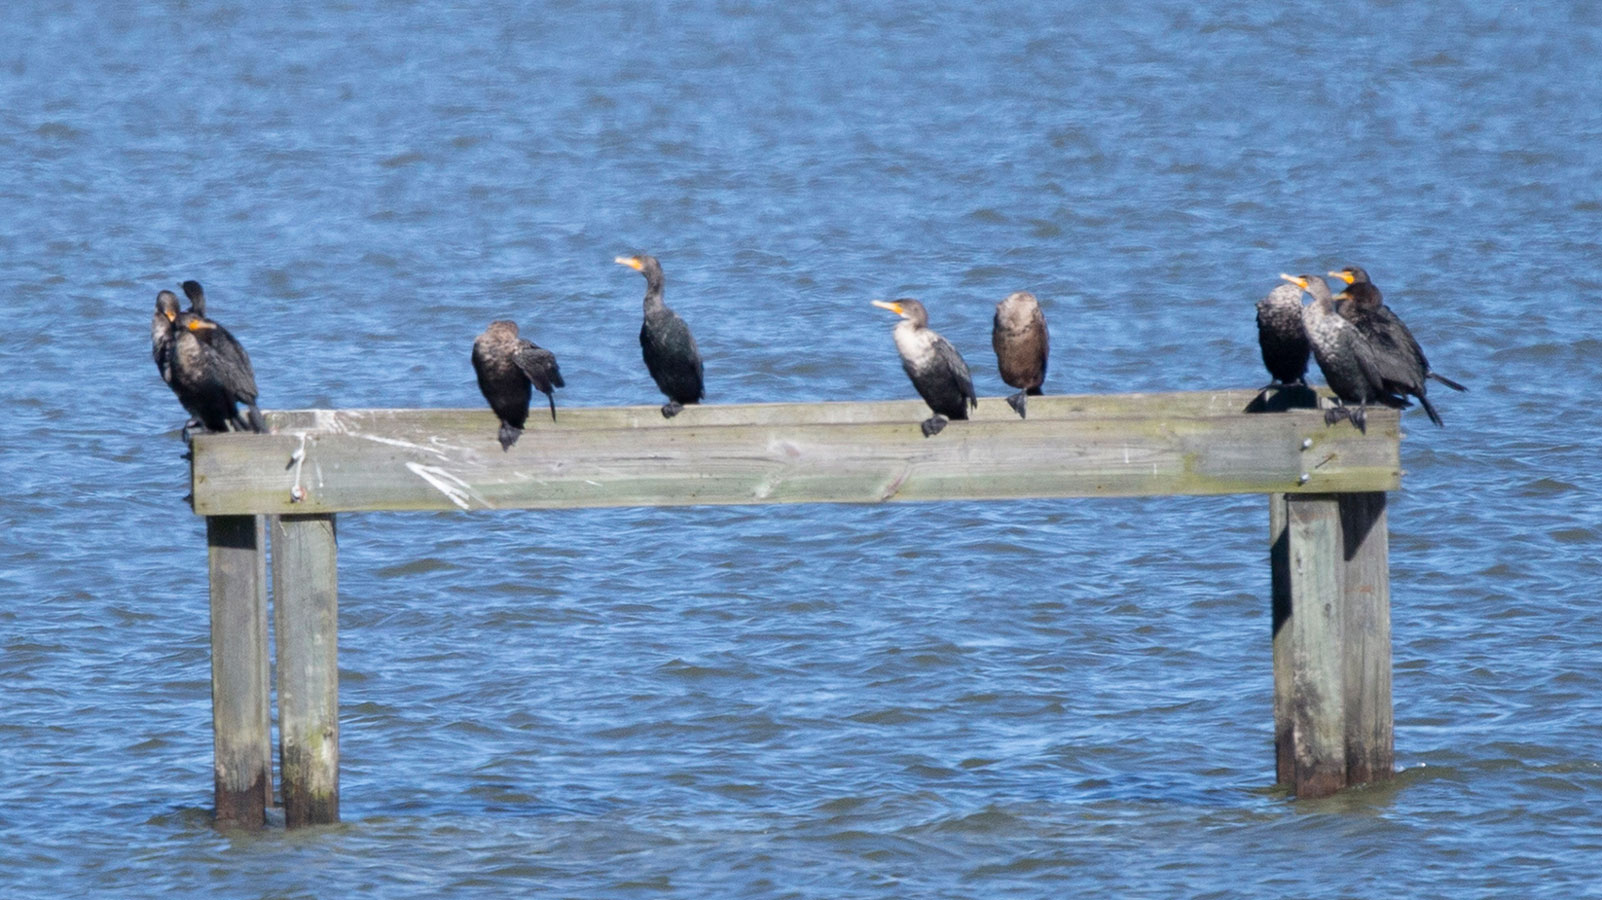 Flock of double-crested cormorants on a wooden platform in water